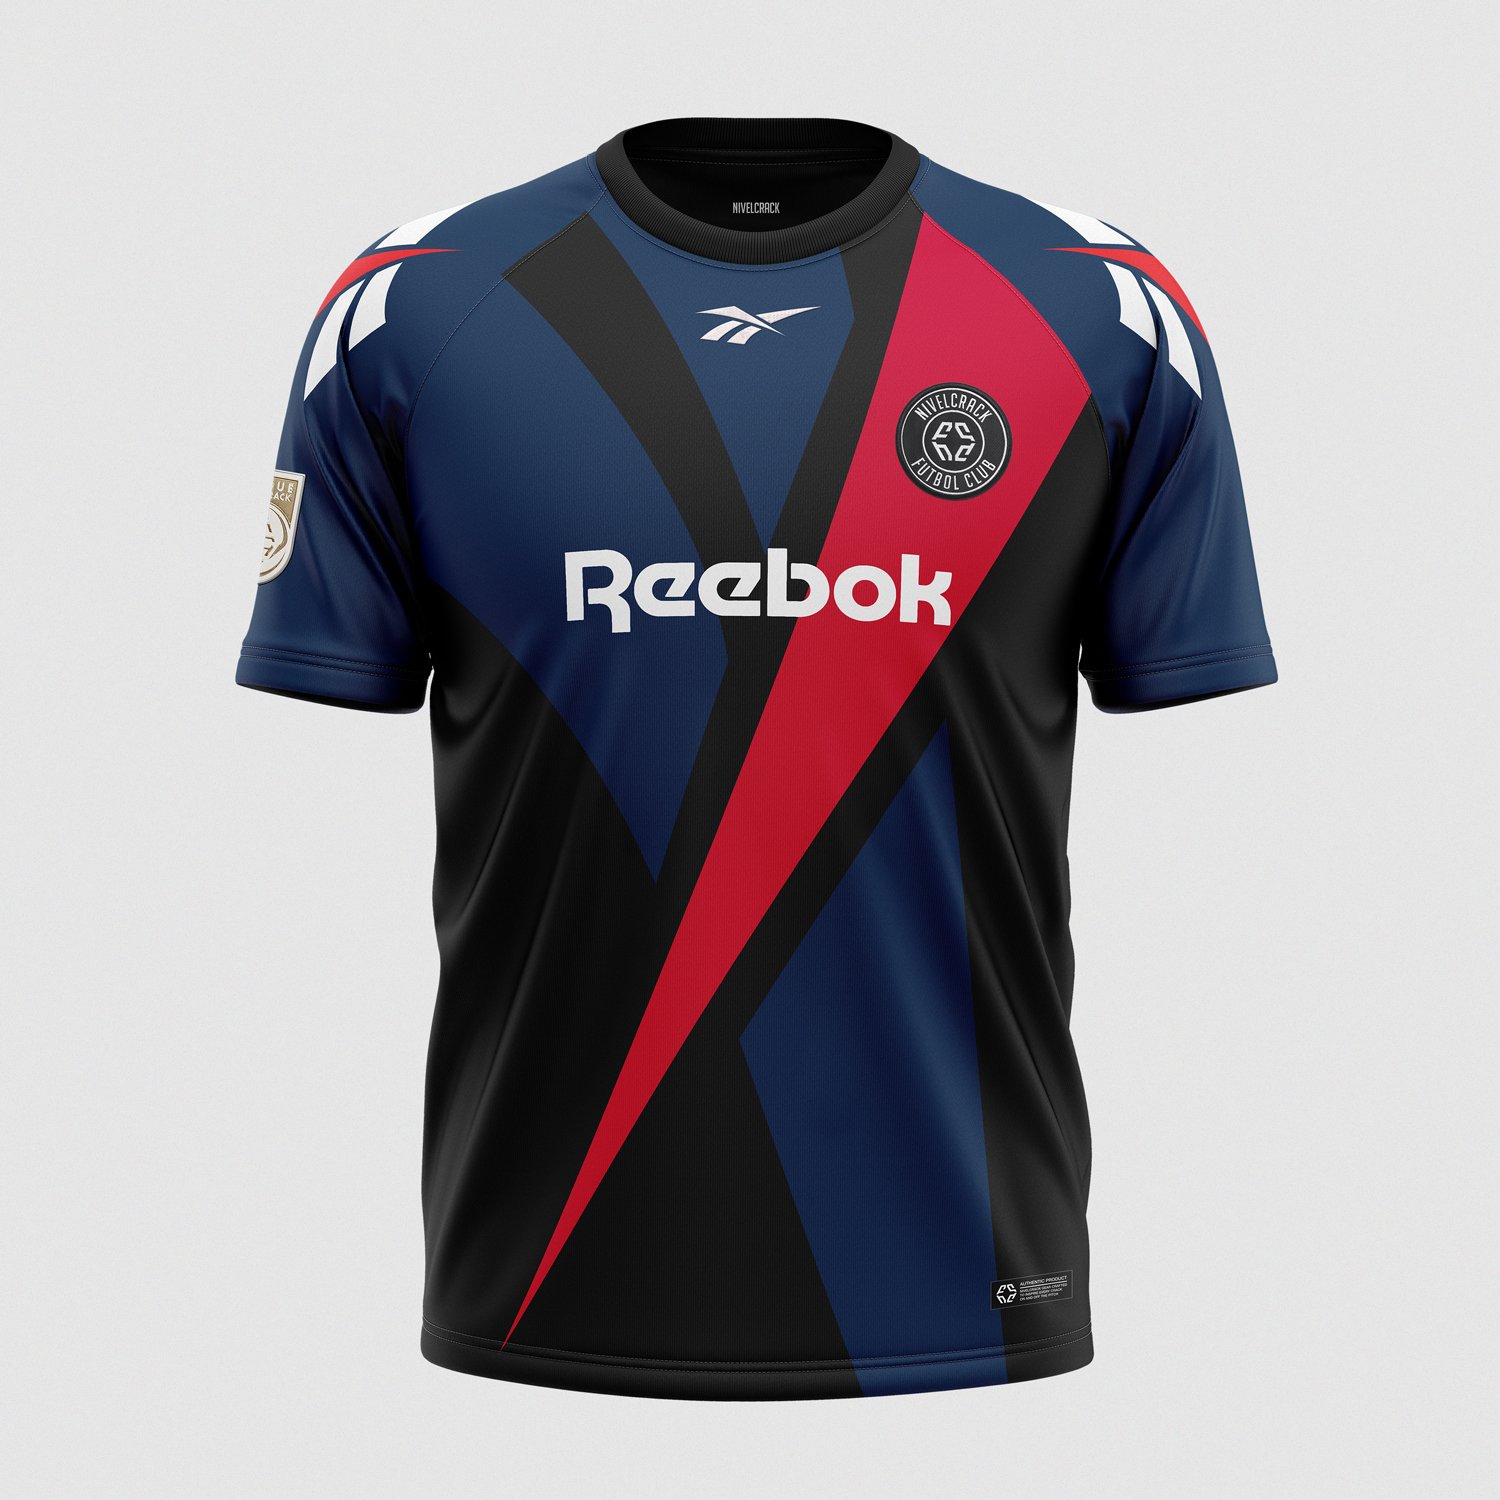 caricia contar Ejército Classic Football Shirts on Twitter: "Vector Clásico Jersey: Made through  the collaboration between @Reebok and Nivelcrack, reflects the inspiration  from the Vector logo born in the '90s See more here -  https://t.co/9zeOzWxPJj